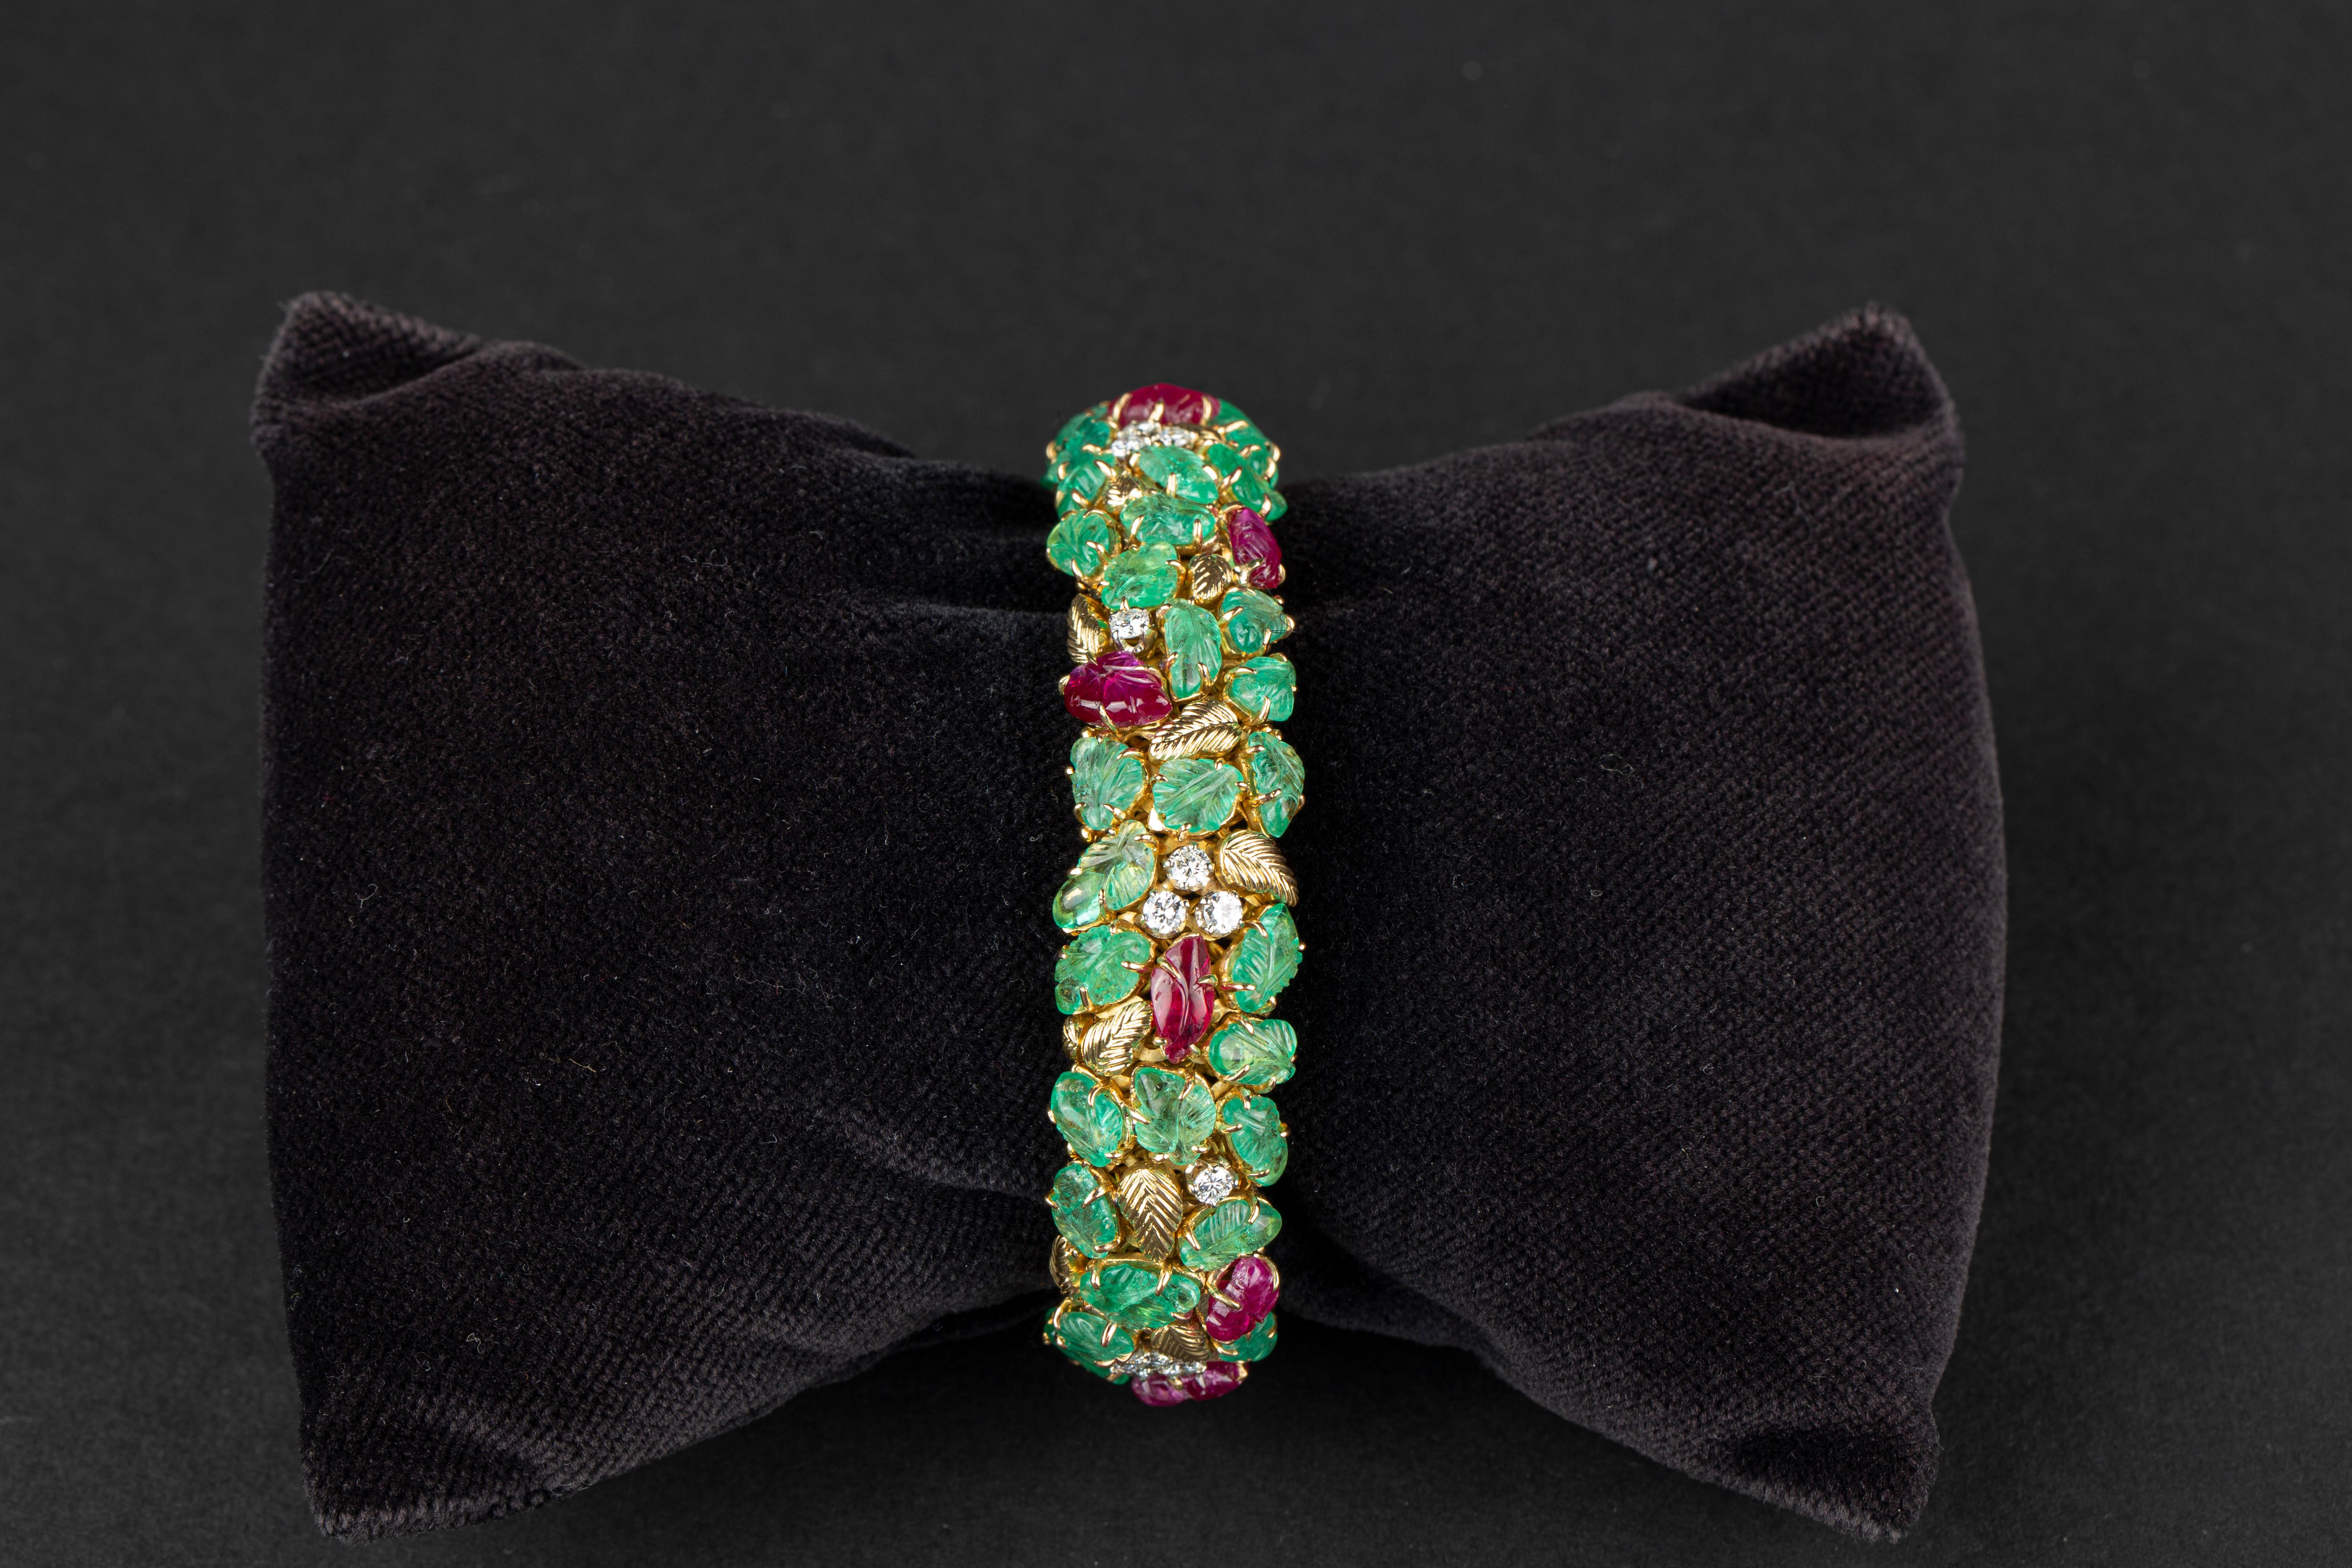 Tutti Frutti Carved Emeralds Rubies Diamonds Italian Bracelet In Excellent Condition For Sale In New York, NY